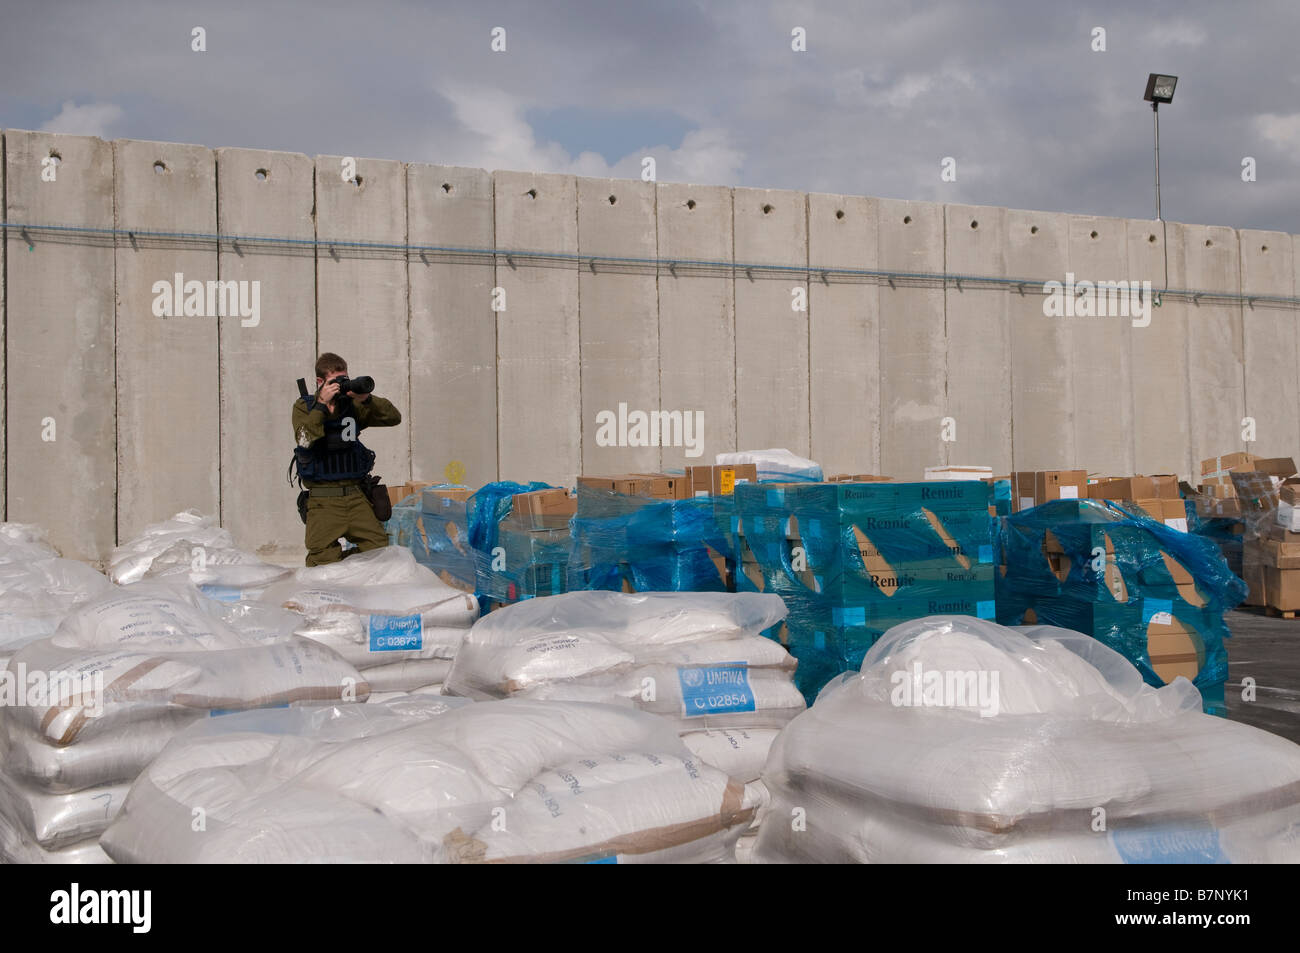 An Israeli soldier photographing sacks of food donated by UNRWA and WFP prepared to enter Gaza strip at the Kerem Shalom border crossing Israel Stock Photo